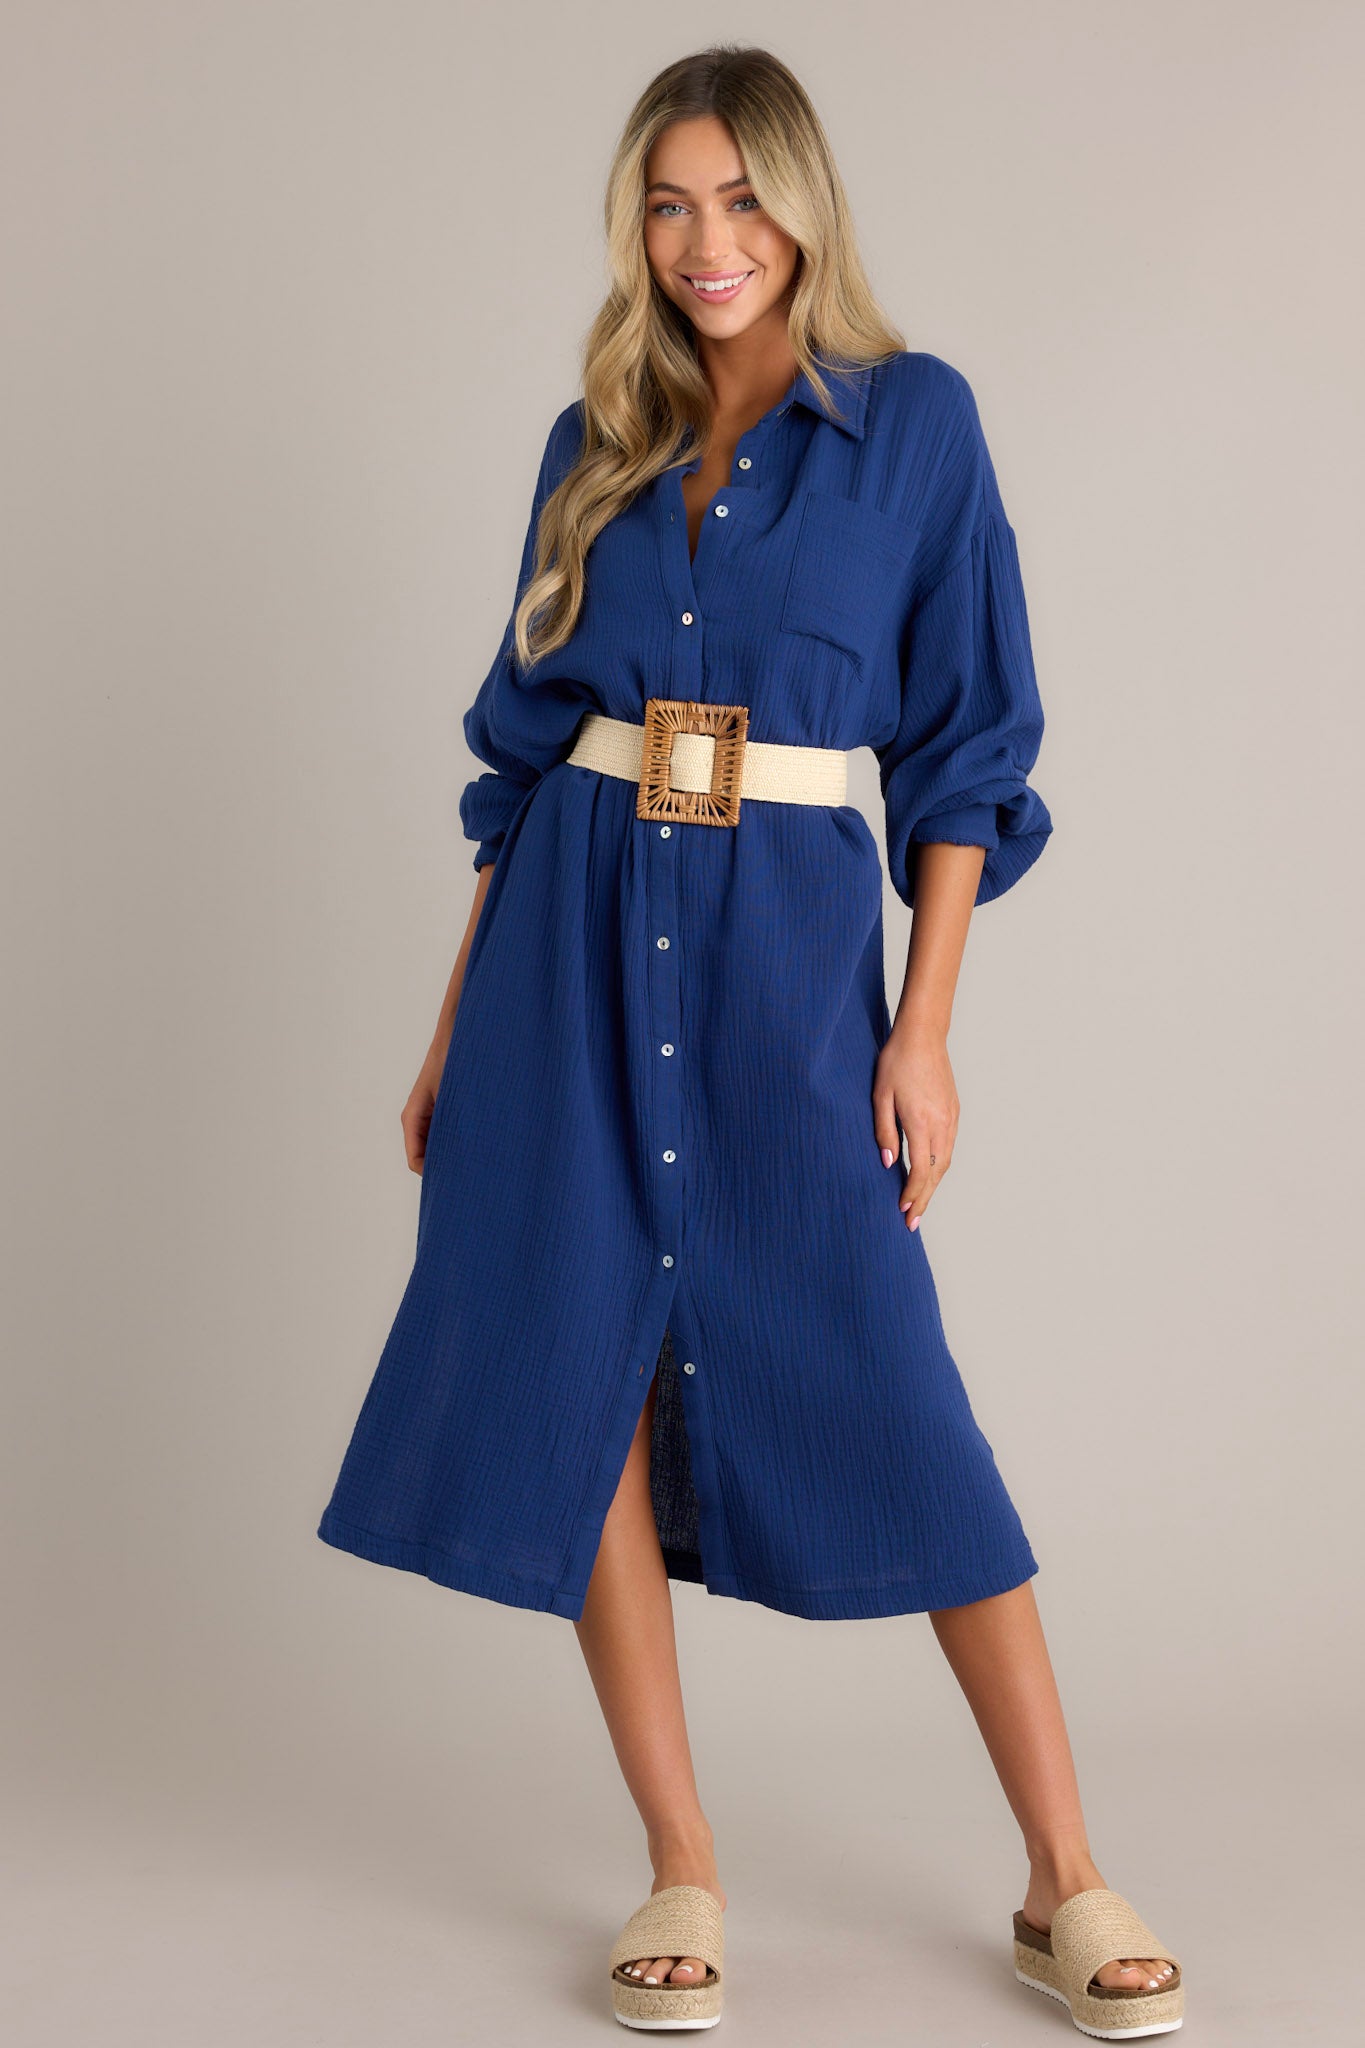 This Navy Gauze Midi Dress features a collared neckline, functional buttons down the front, a front pocket on the left side of the bust, long sleeves with a cuff secured by a functional button, and two slits up the bottom hemline ending just below the knee.